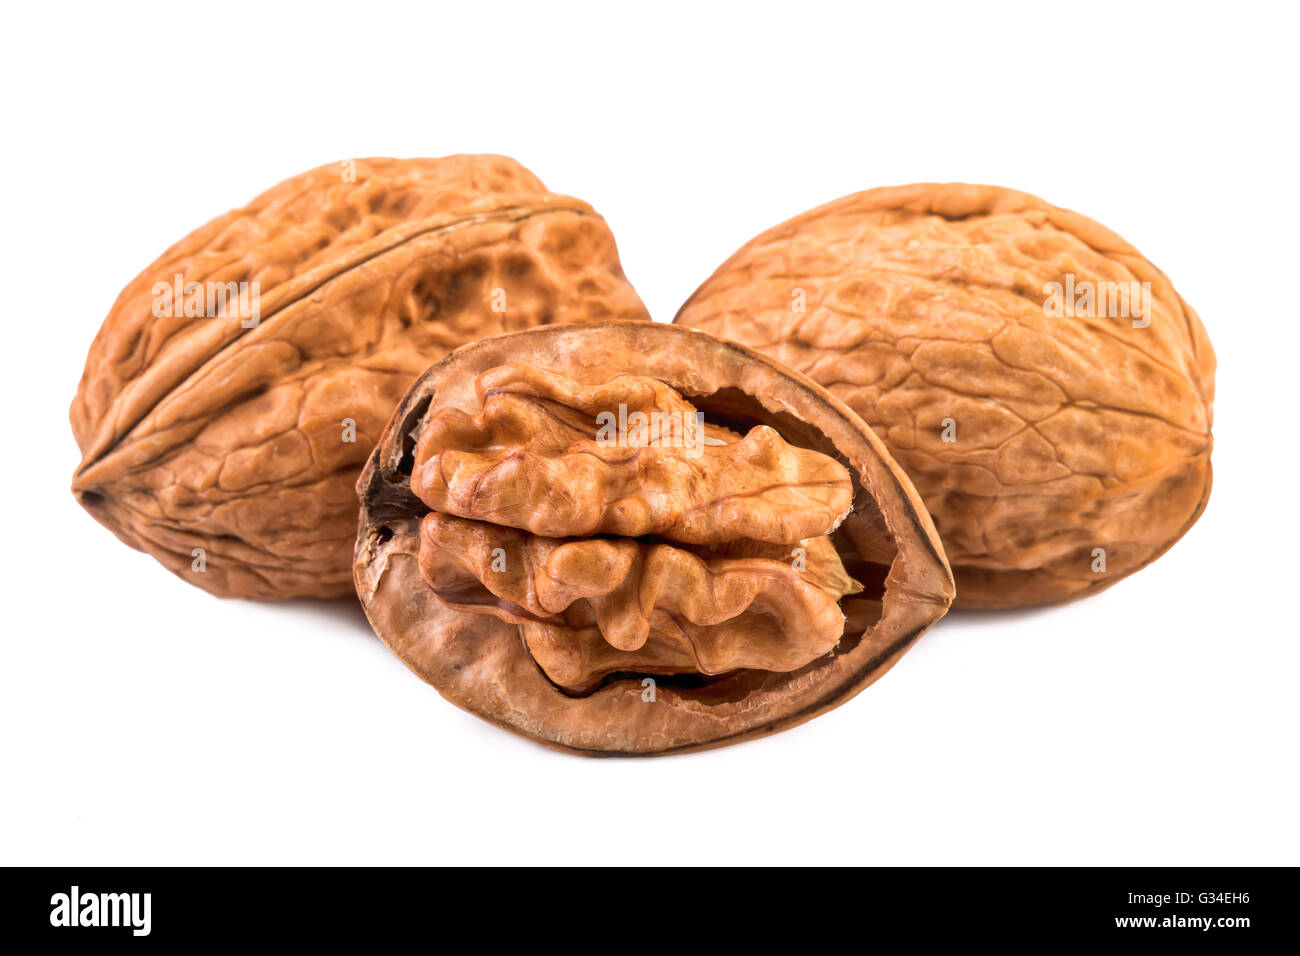 Walnuts whole and half in closeup. Stock Photo